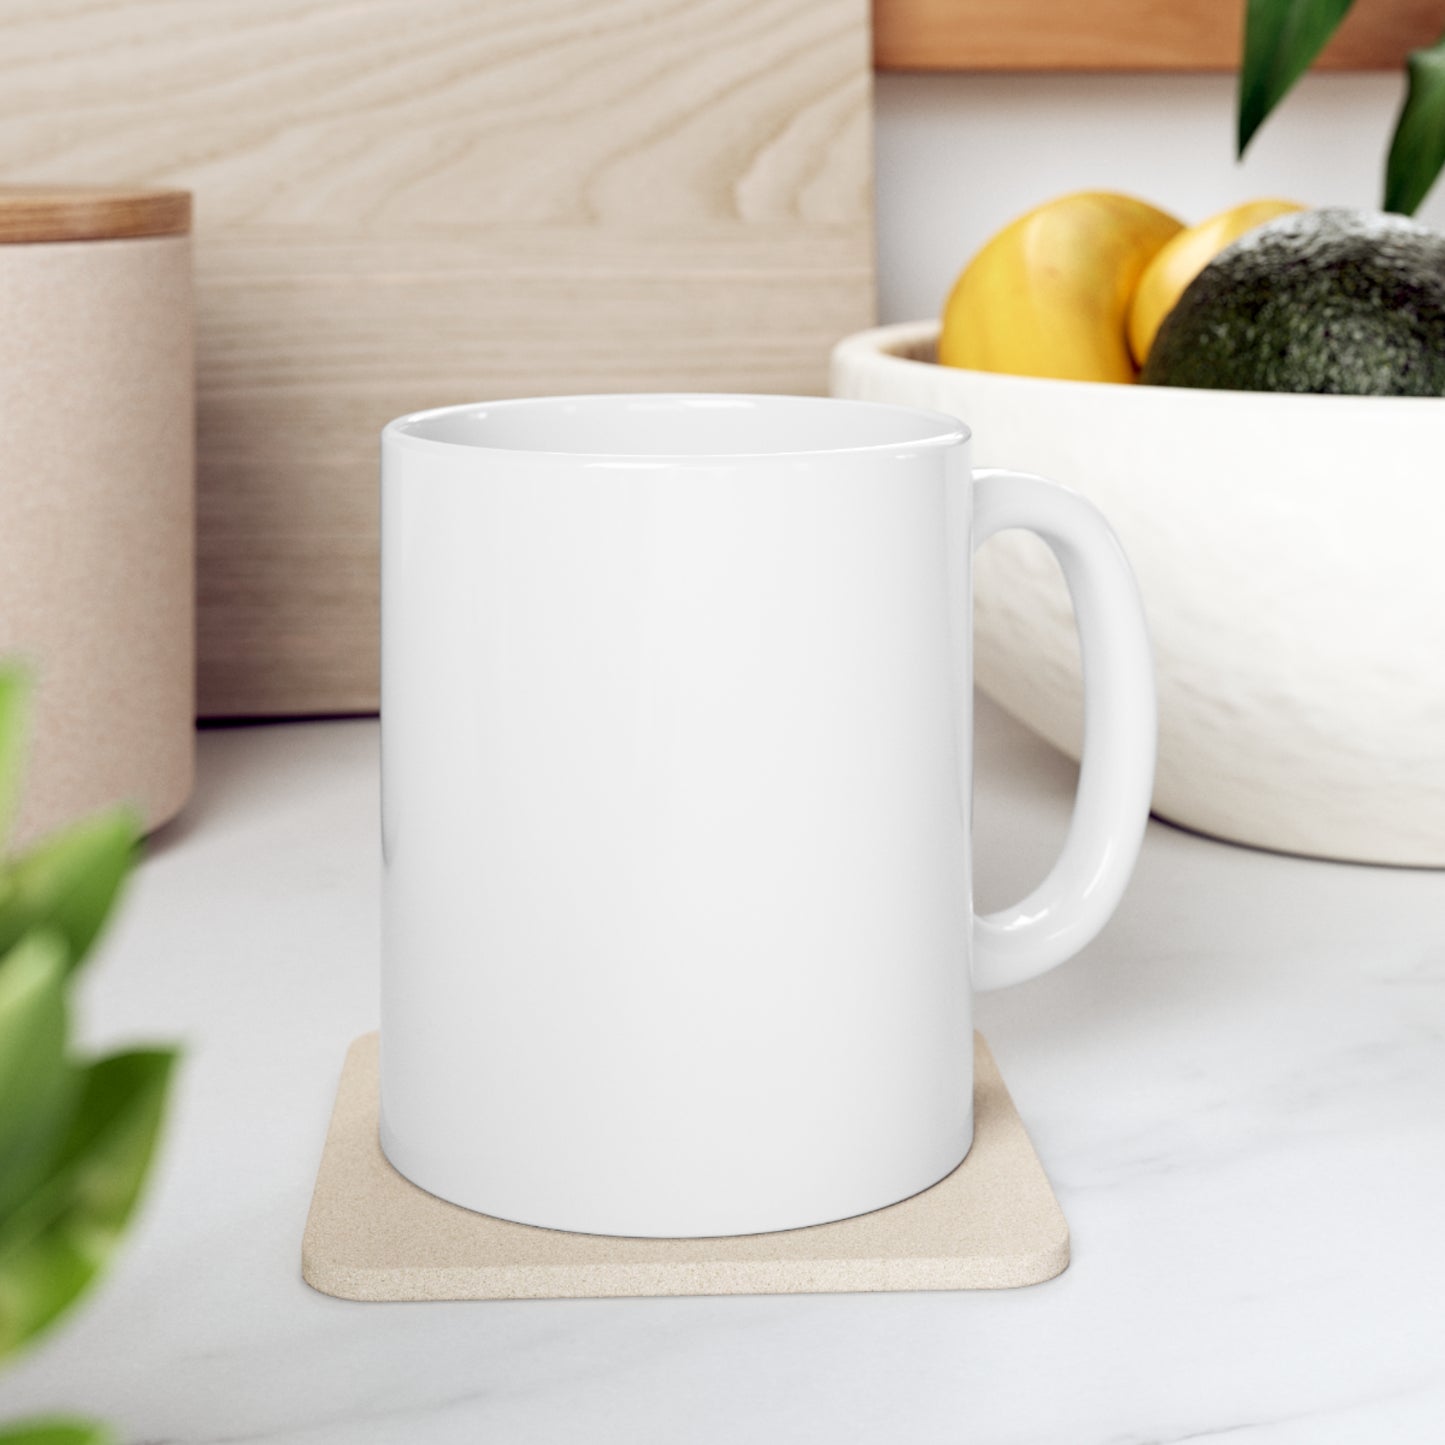 "Best Teacher Ever" Coffee Mug - Weave Got Gifts - Unique Gifts You Won’t Find Anywhere Else!